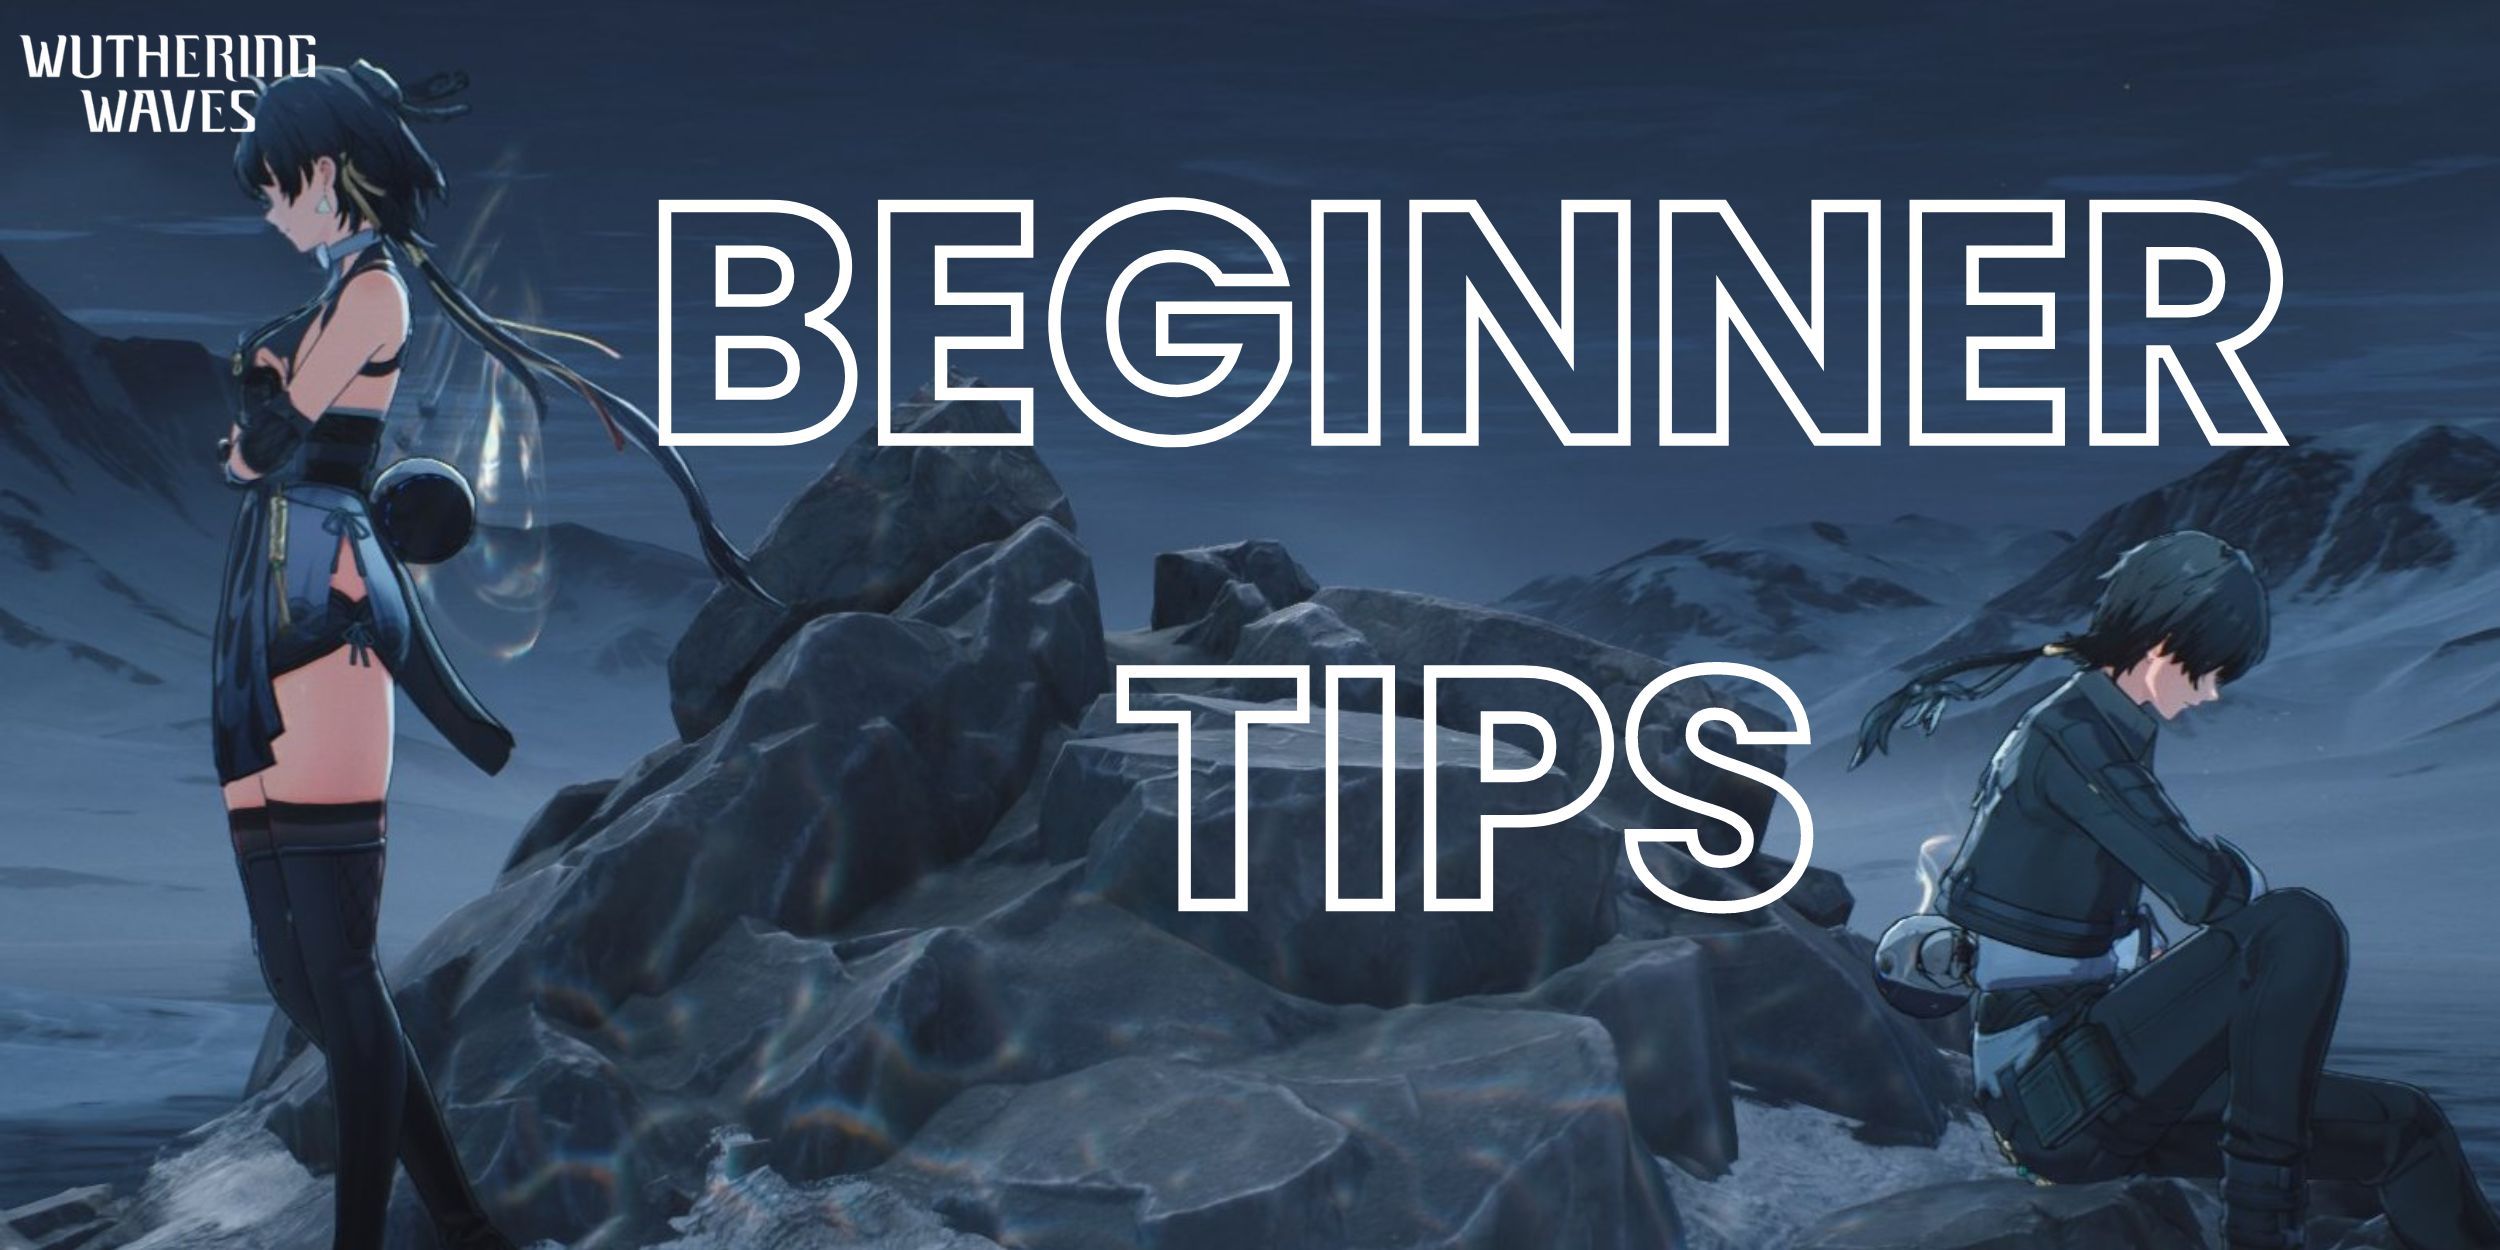 Wuthering Waves_ Beginner Tips